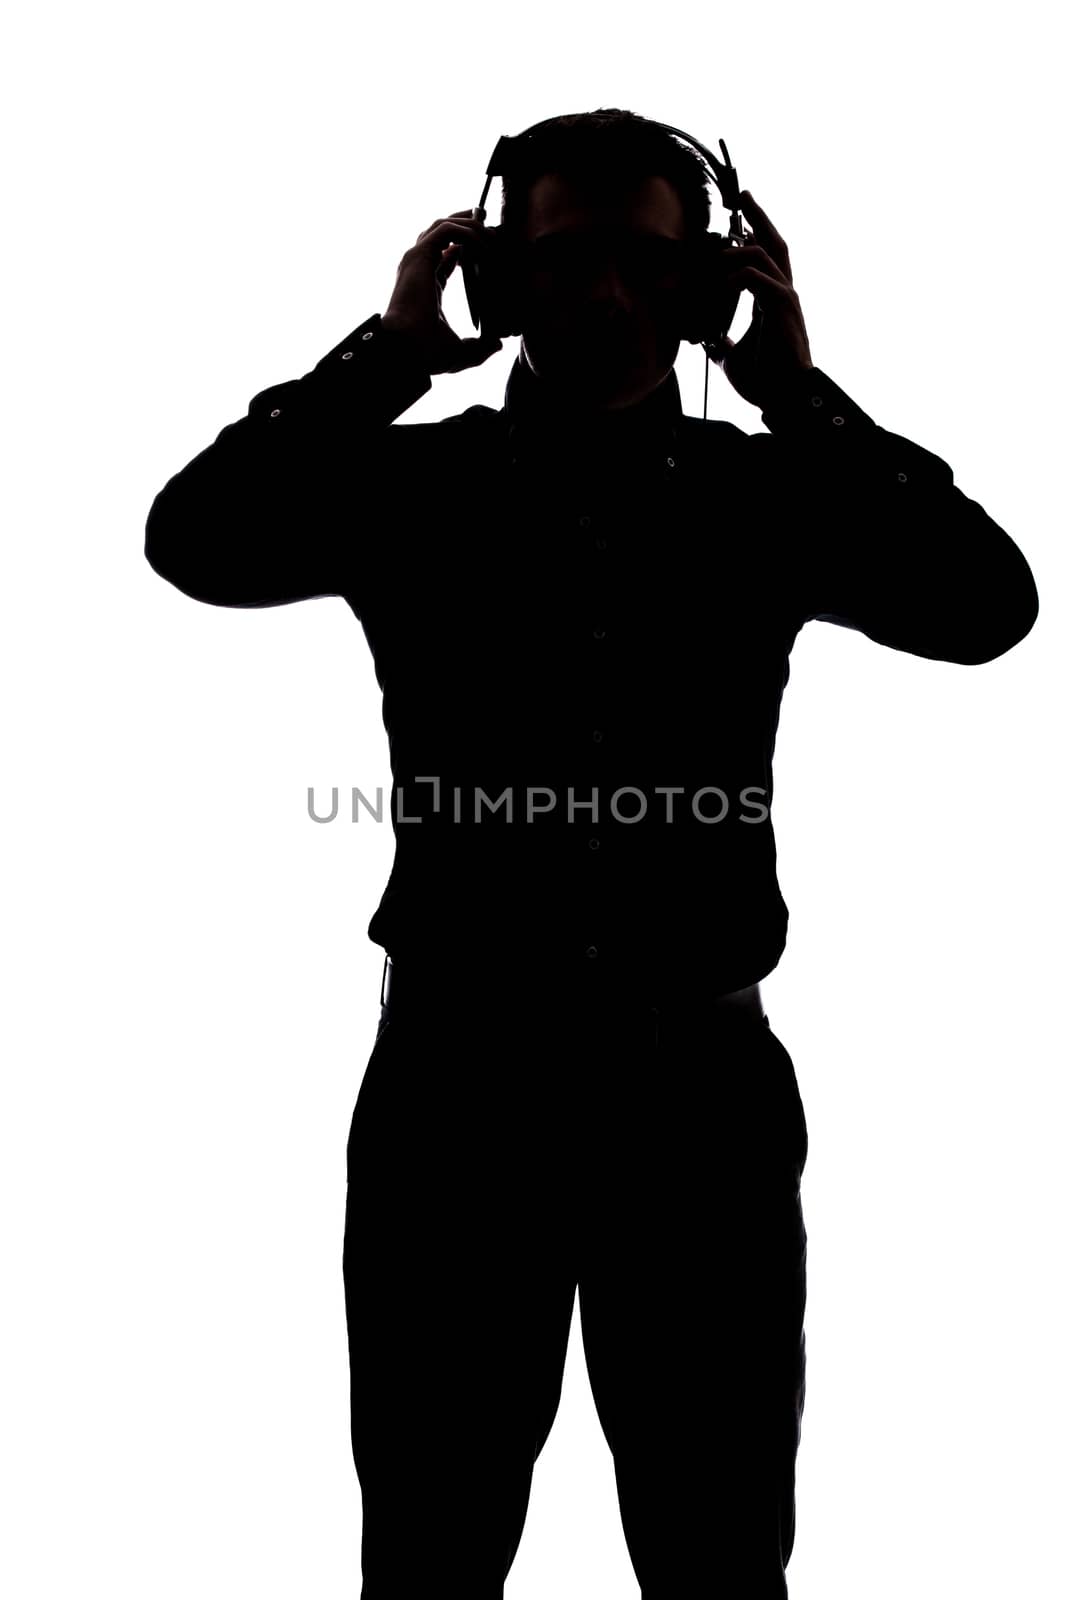 Man listening to music with headphones in silhouette isolated over white background